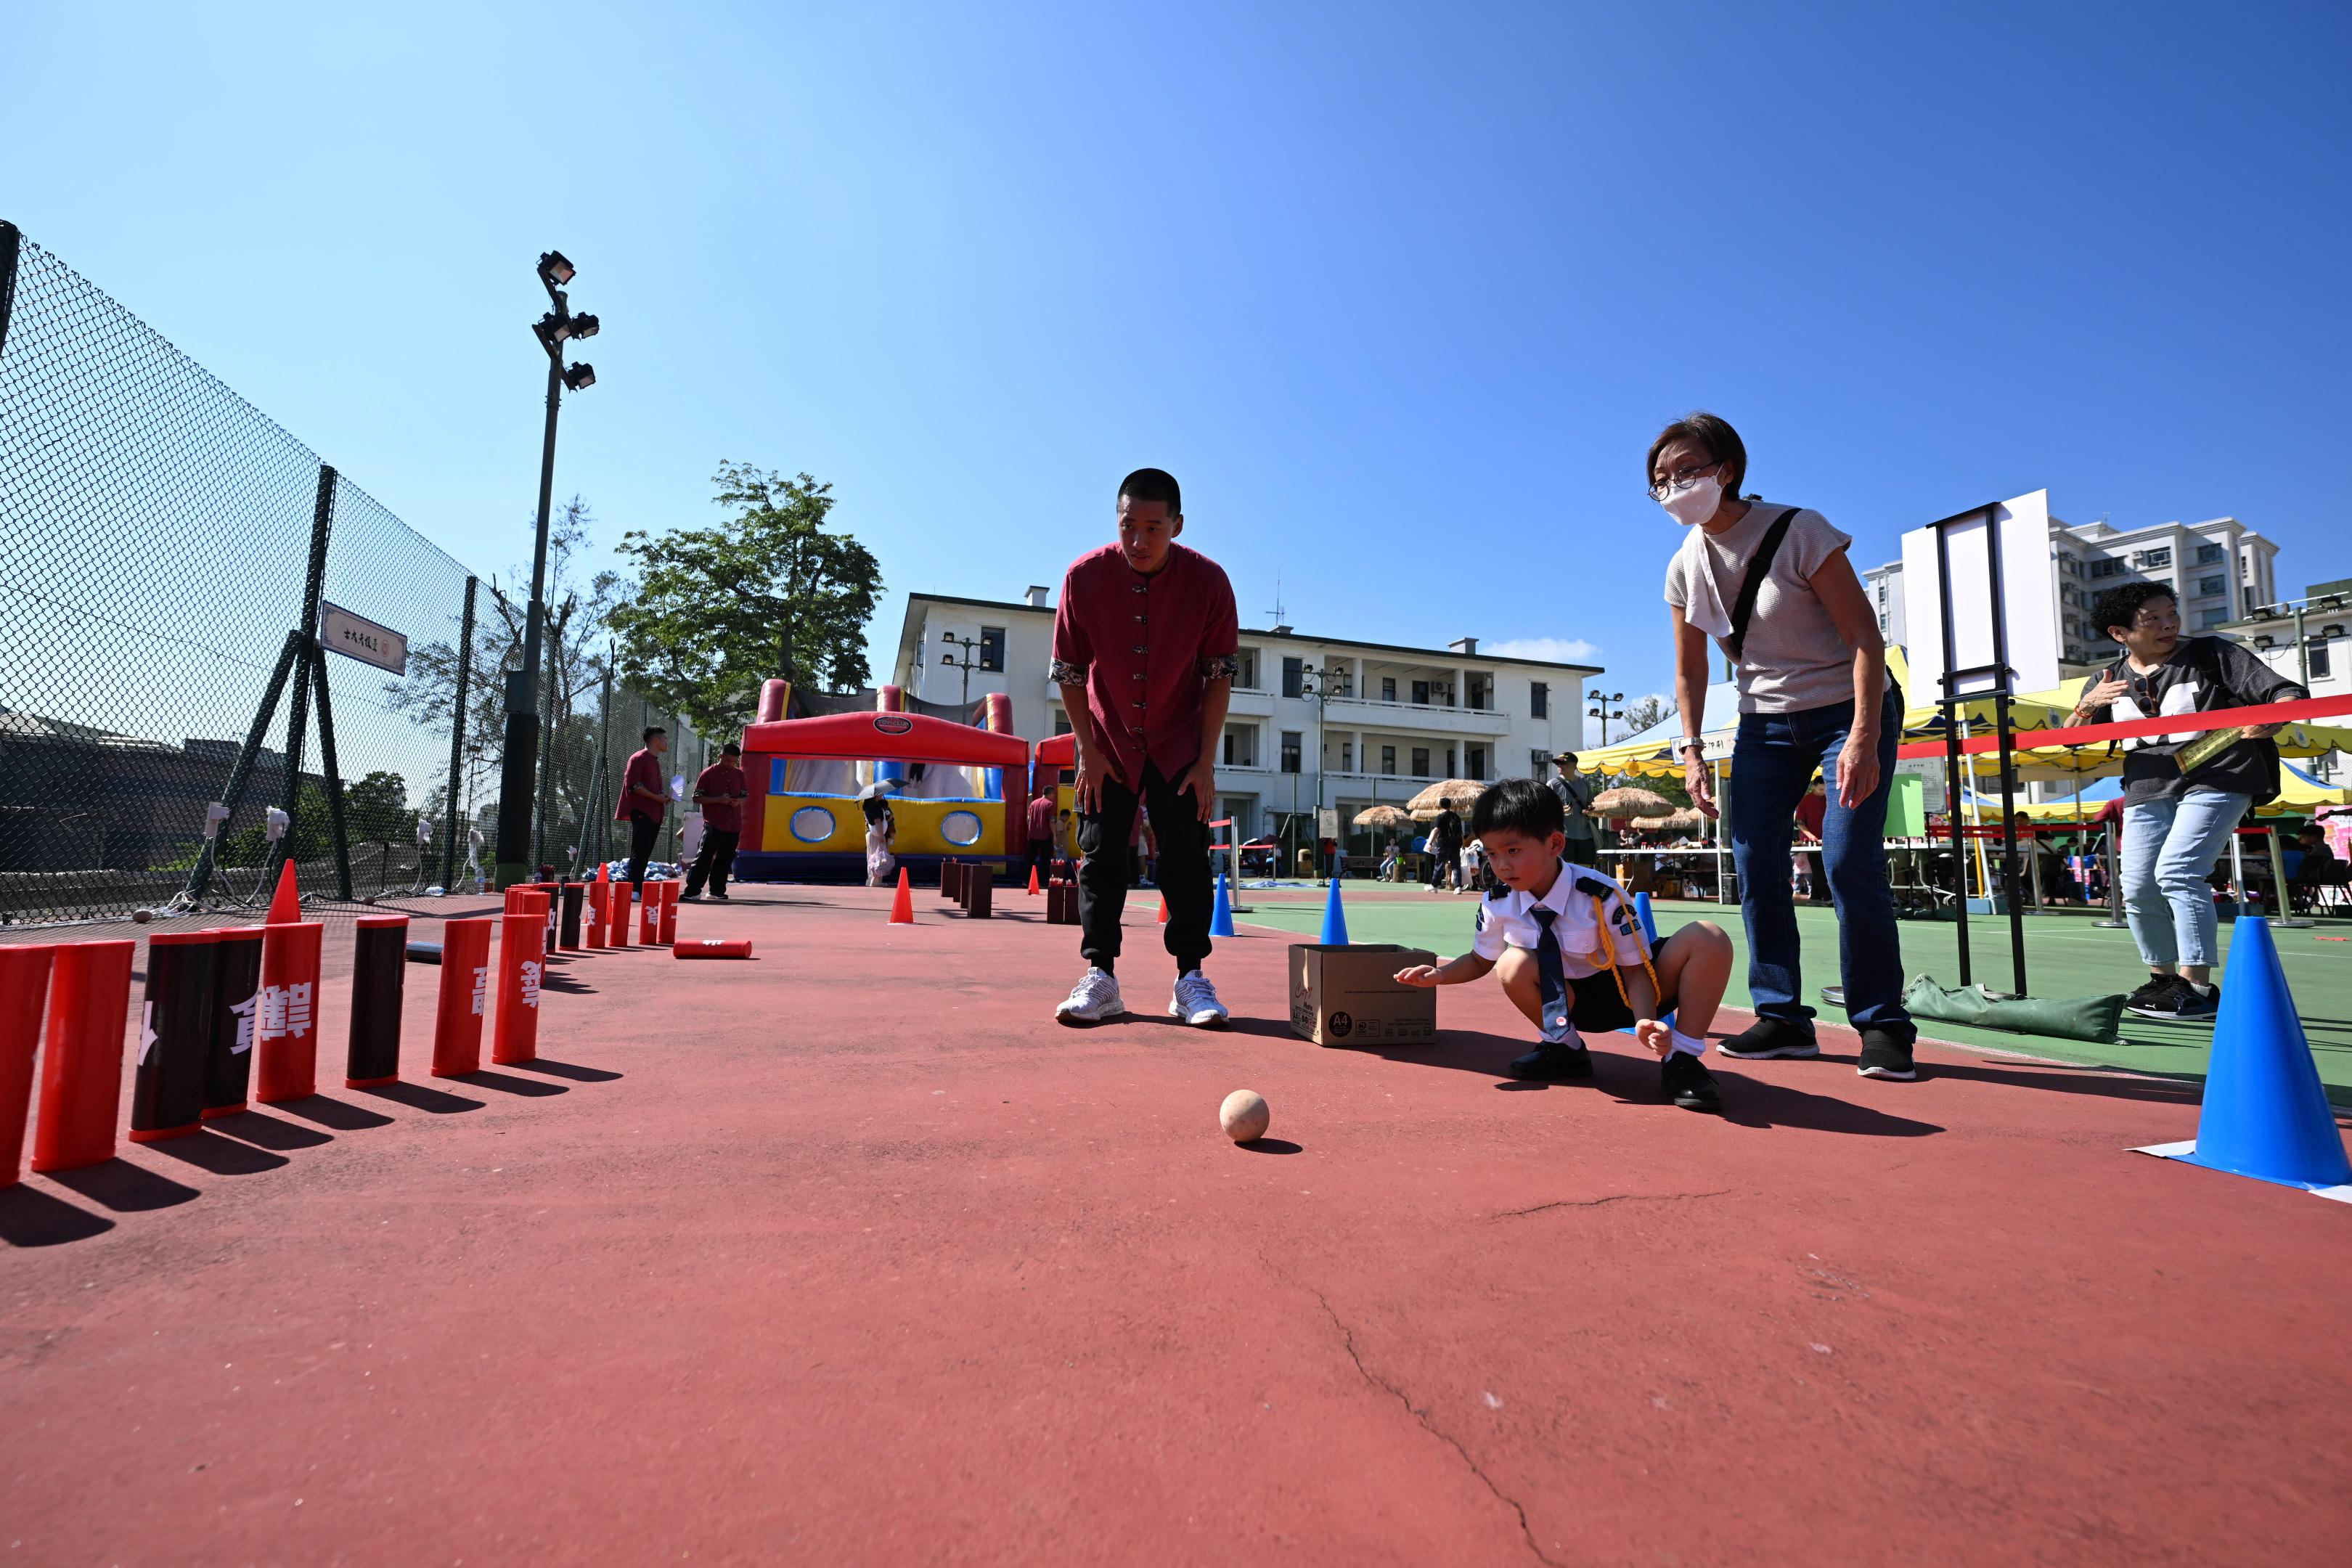 The Correctional Services Department (CSD) Sports Association held the CSD’s 68th Autumn Fair at the football field adjacent to Stanley Prison today (November 4). Photo shows members of the public taking part in a traditional Chinese sport game of mushe.